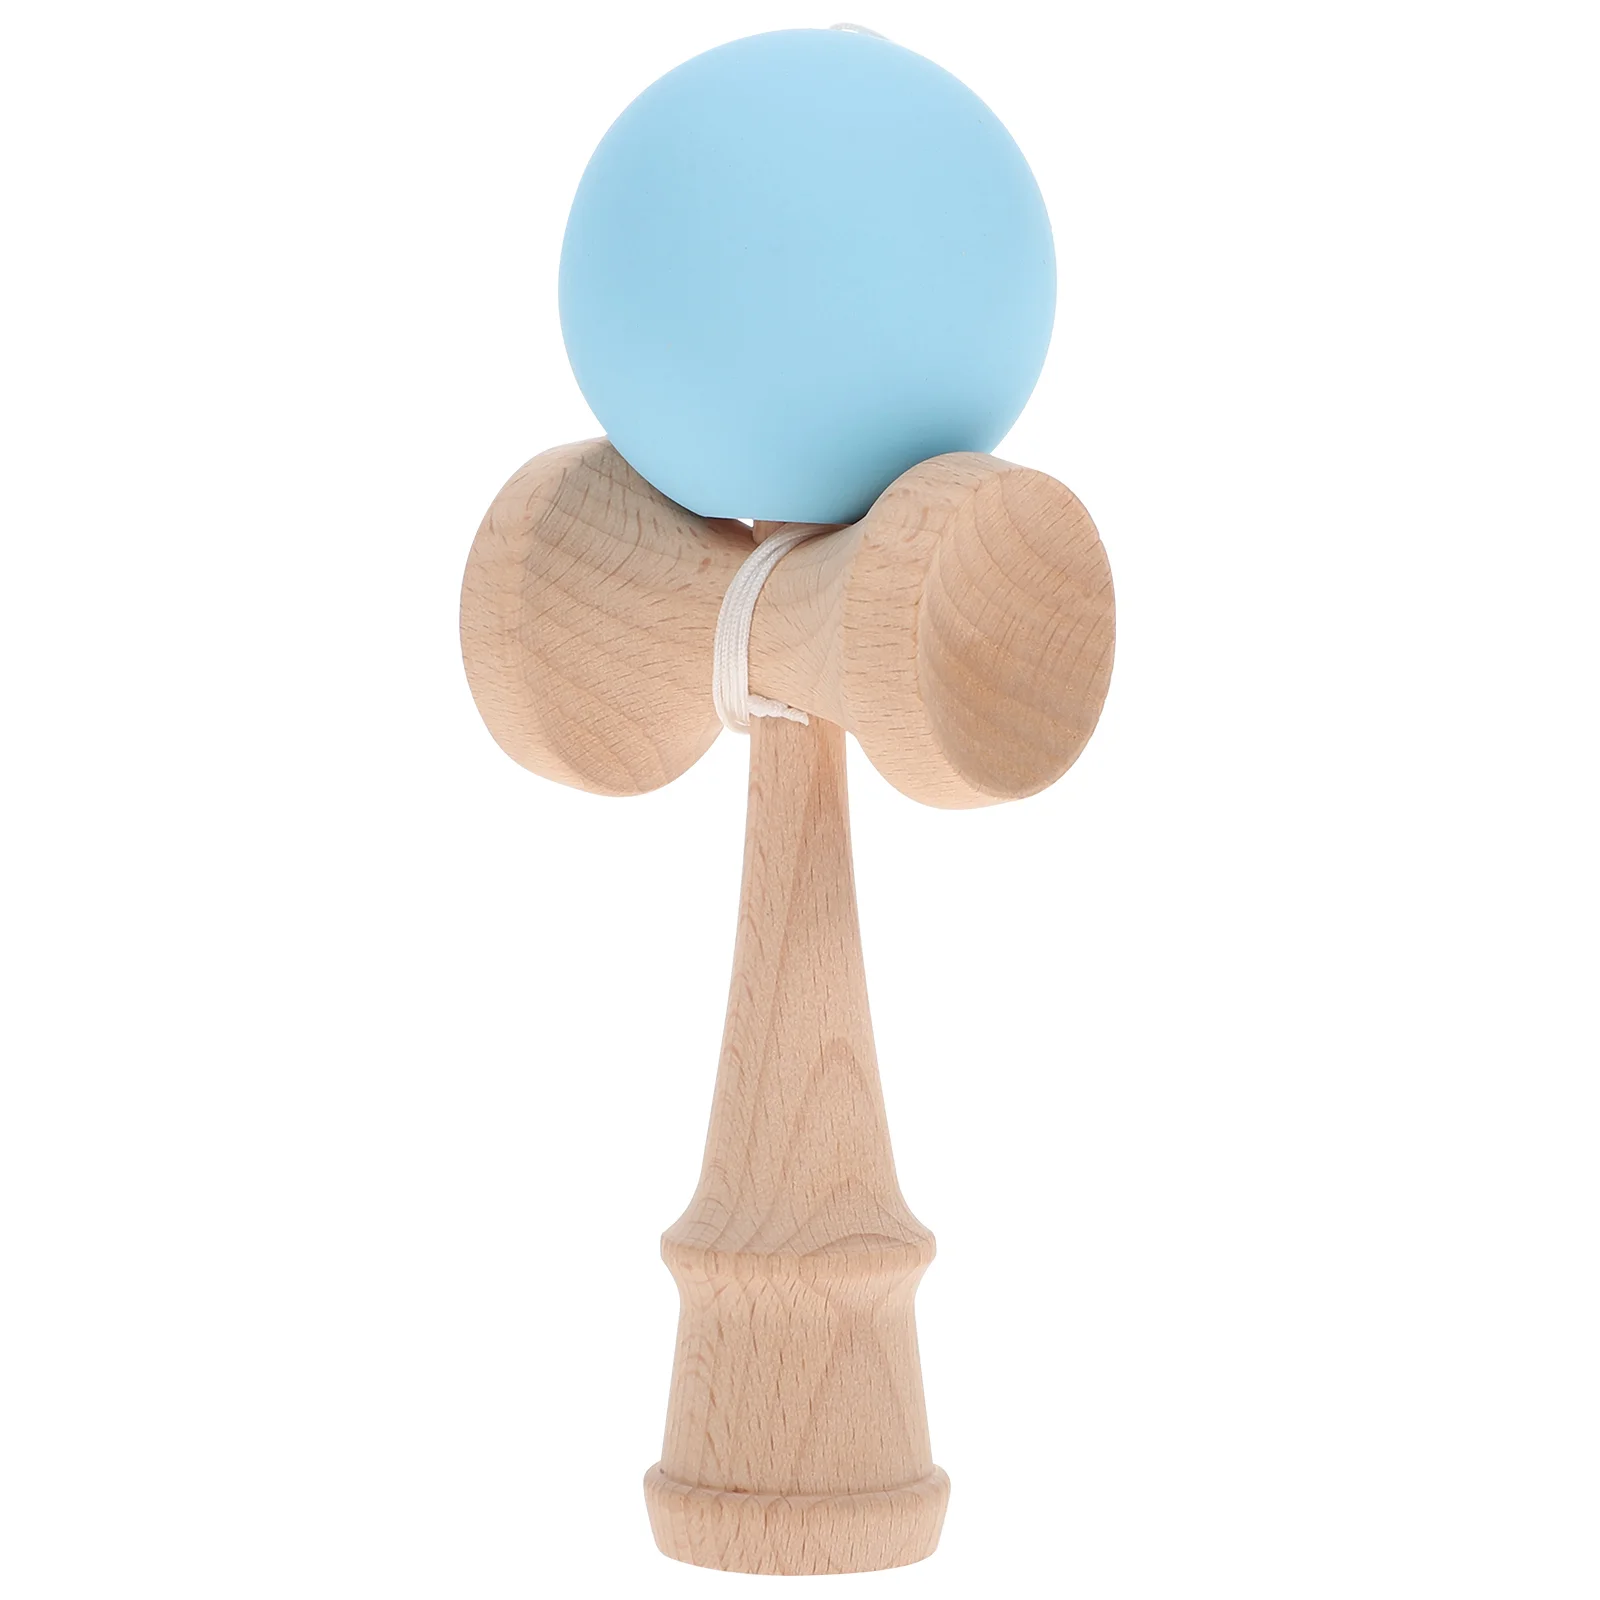 

Toy Kendall Kid Kendama Toys for Kids Classical Ball Children Funny Wooden Pocket